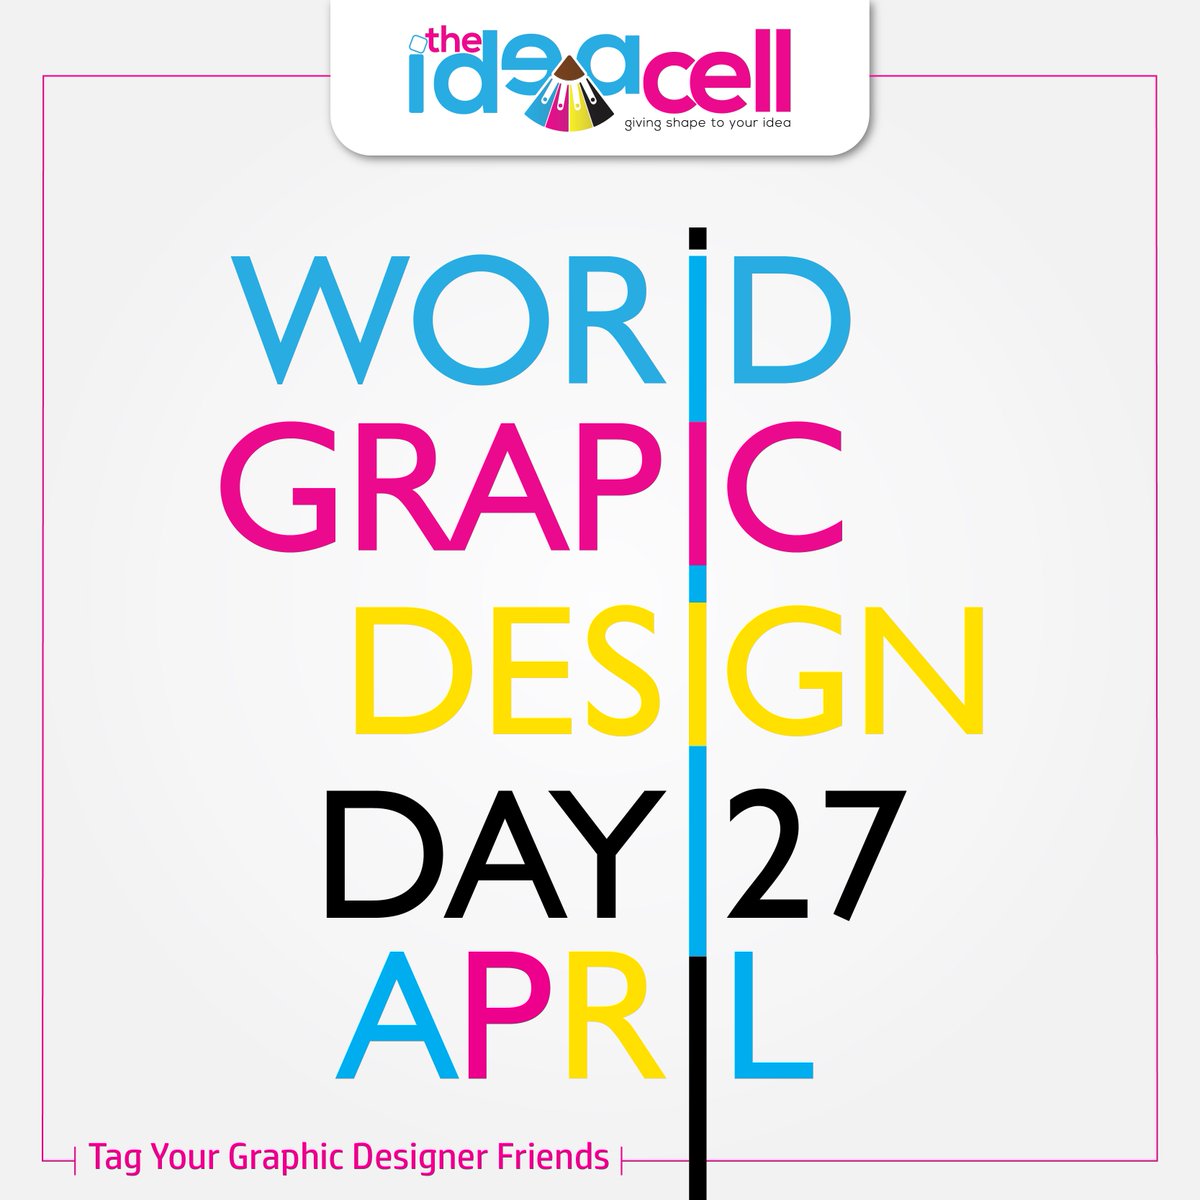 To all the #GraphicDesigner a Happy #WorldGraphicDesignDay
#theideacell #freelancegraphicdesigner #branding #LogoDesign #designing #poster